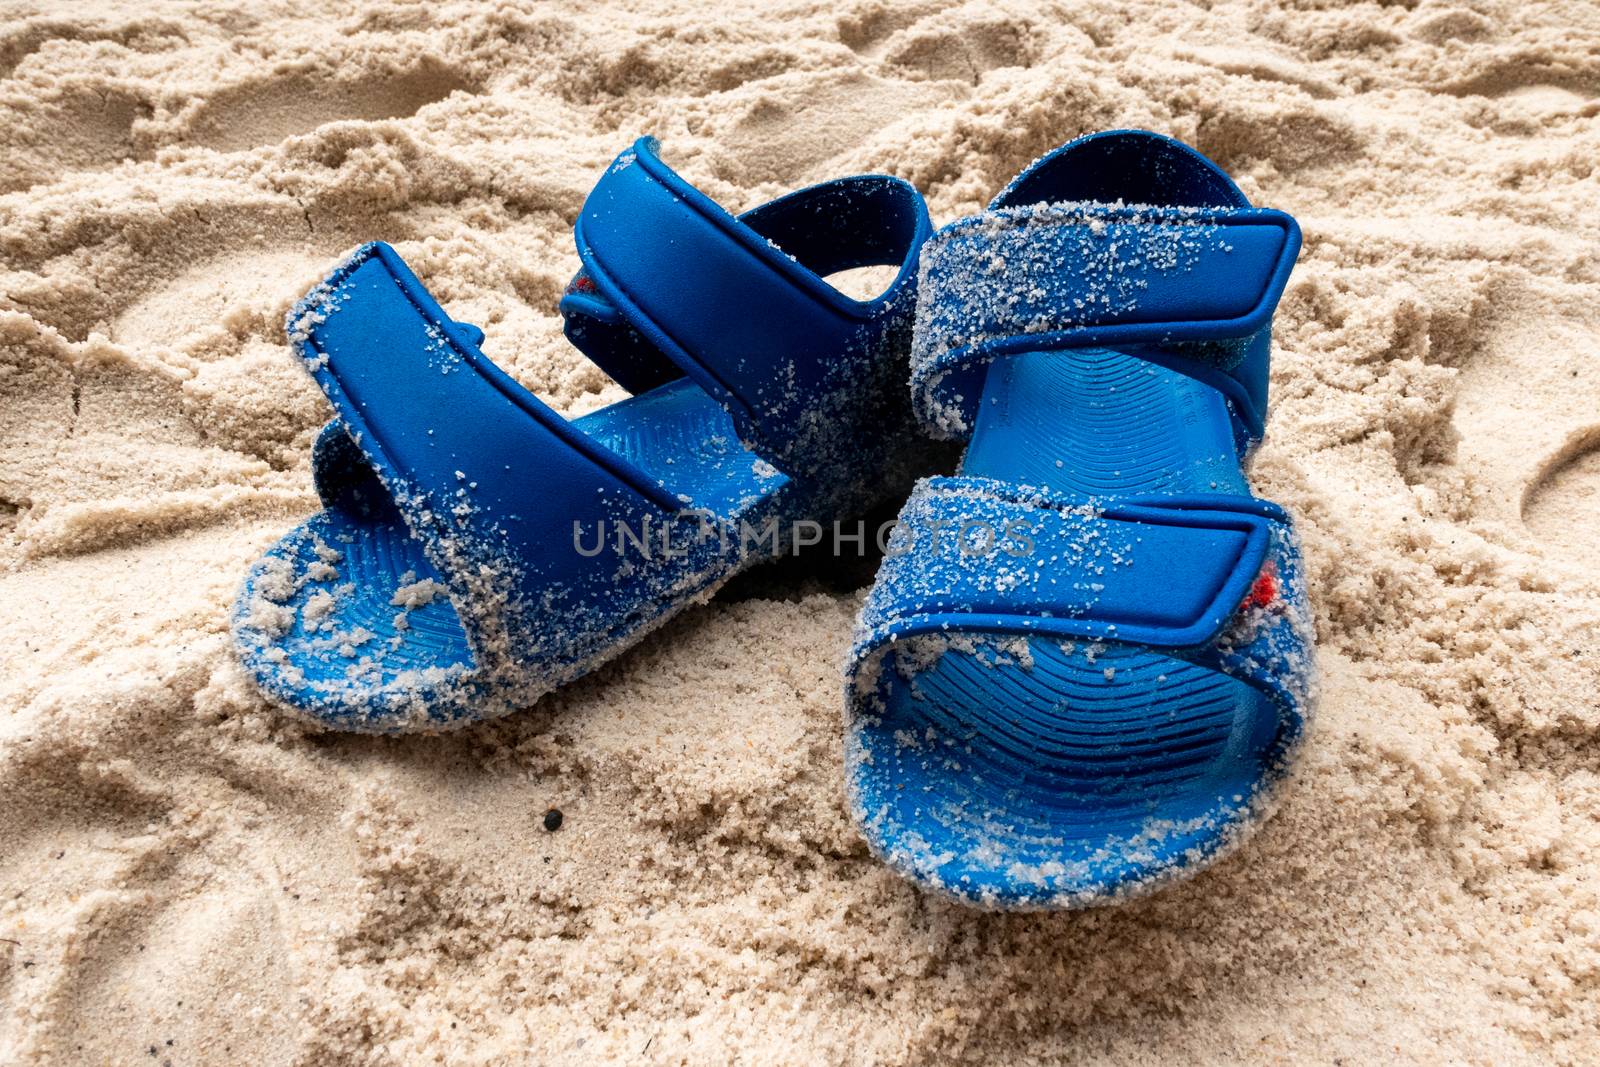 A pair of blue children's sandals standing in the sand on a beach and dirty with sand. The sandals have velcro fastenings.